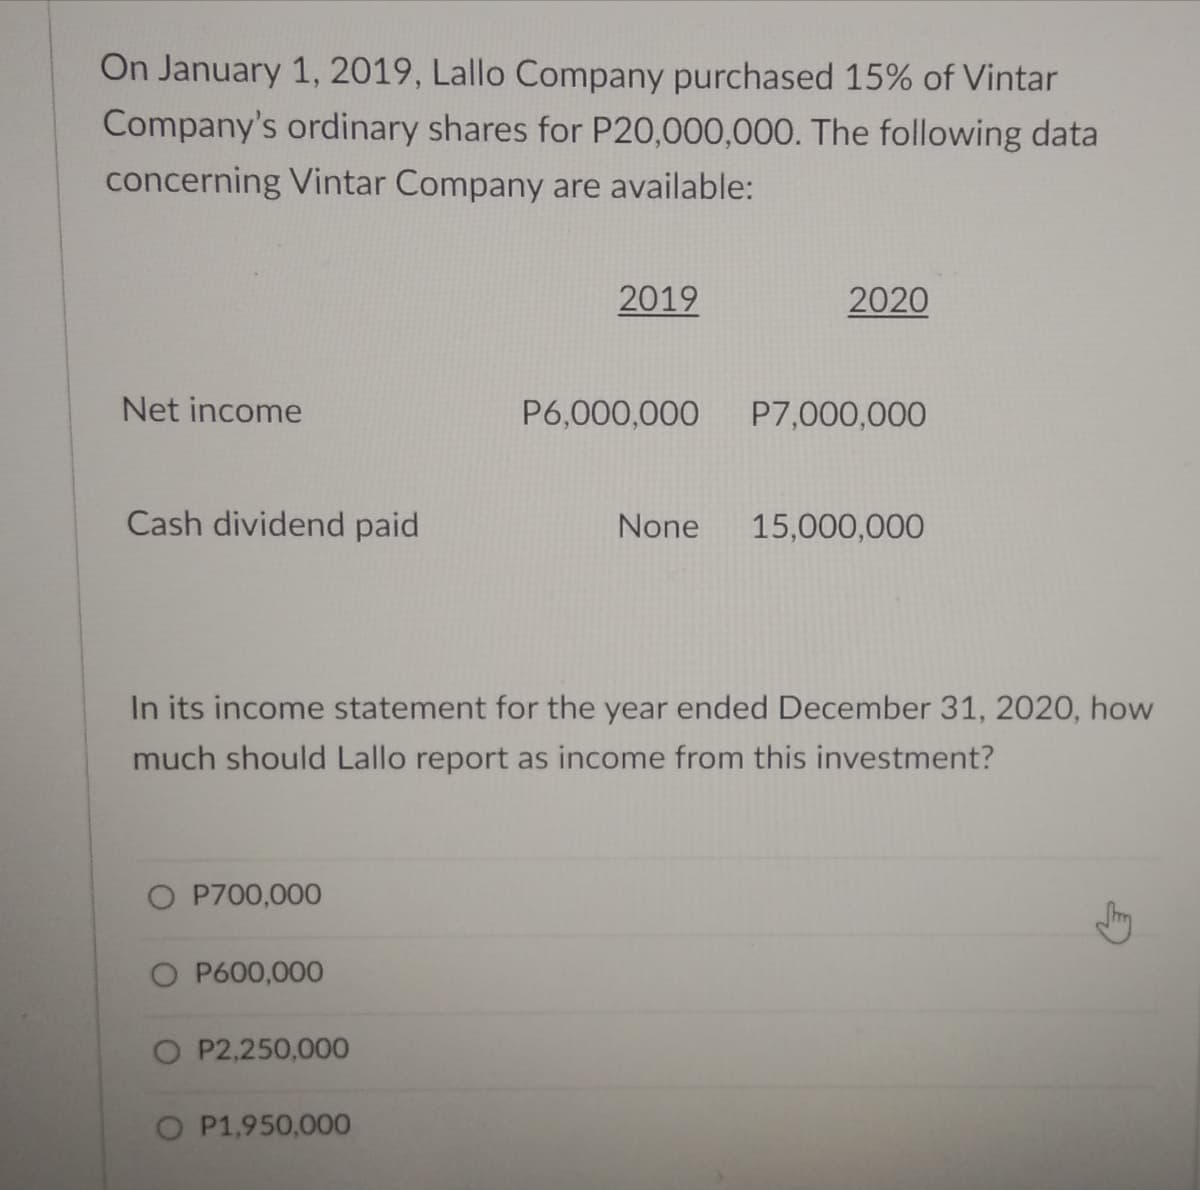 On January 1, 2019, Lallo Company purchased 15% of Vintar
Company's ordinary shares for P20,000,000. The following data
concerning Vintar Company are available:
2019
2020
Net income
P6,000,000
P7,000,000
Cash dividend paid
None
15,000,000
In its income statement for the year ended December 31, 2020, how
much should Lallo report as income from this investment?
O P700,000
O P600,000
O P2,250,000
O P1,950,000
